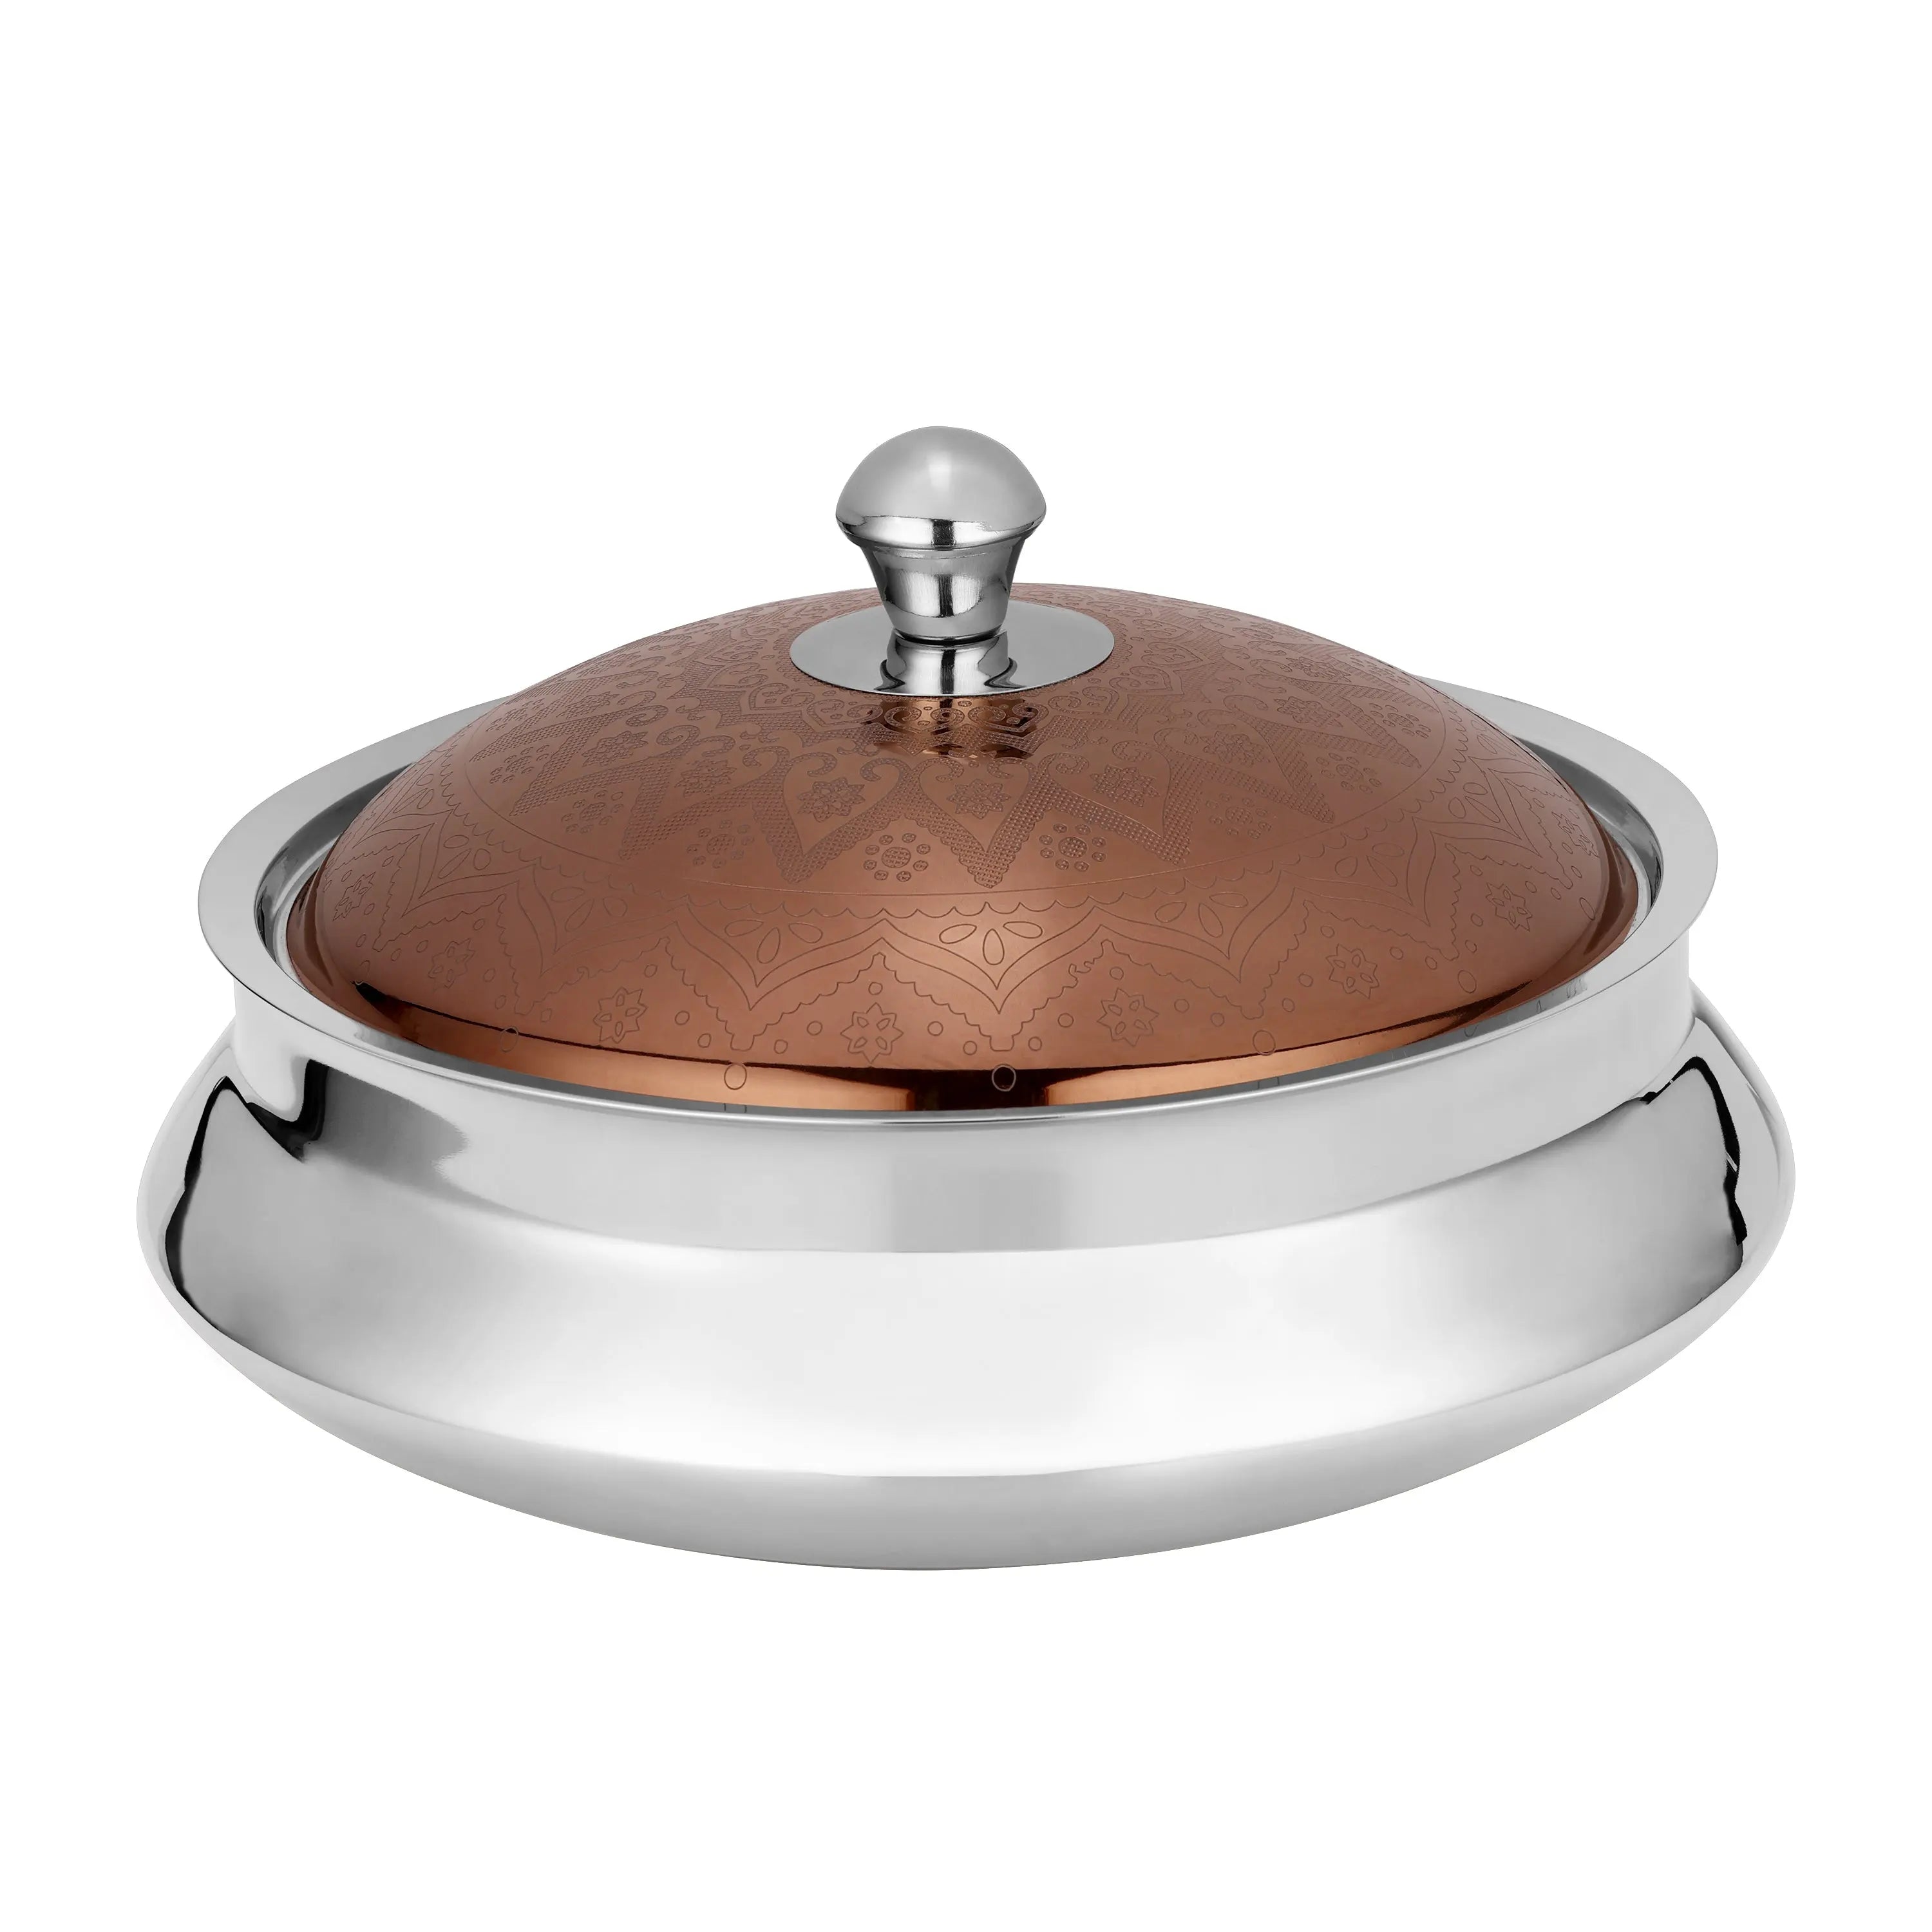 STAINLESS STEEL CASSEROLE MILANO ROSE GOLD ETCHING - CROCKERY WALA AND COMPANY 